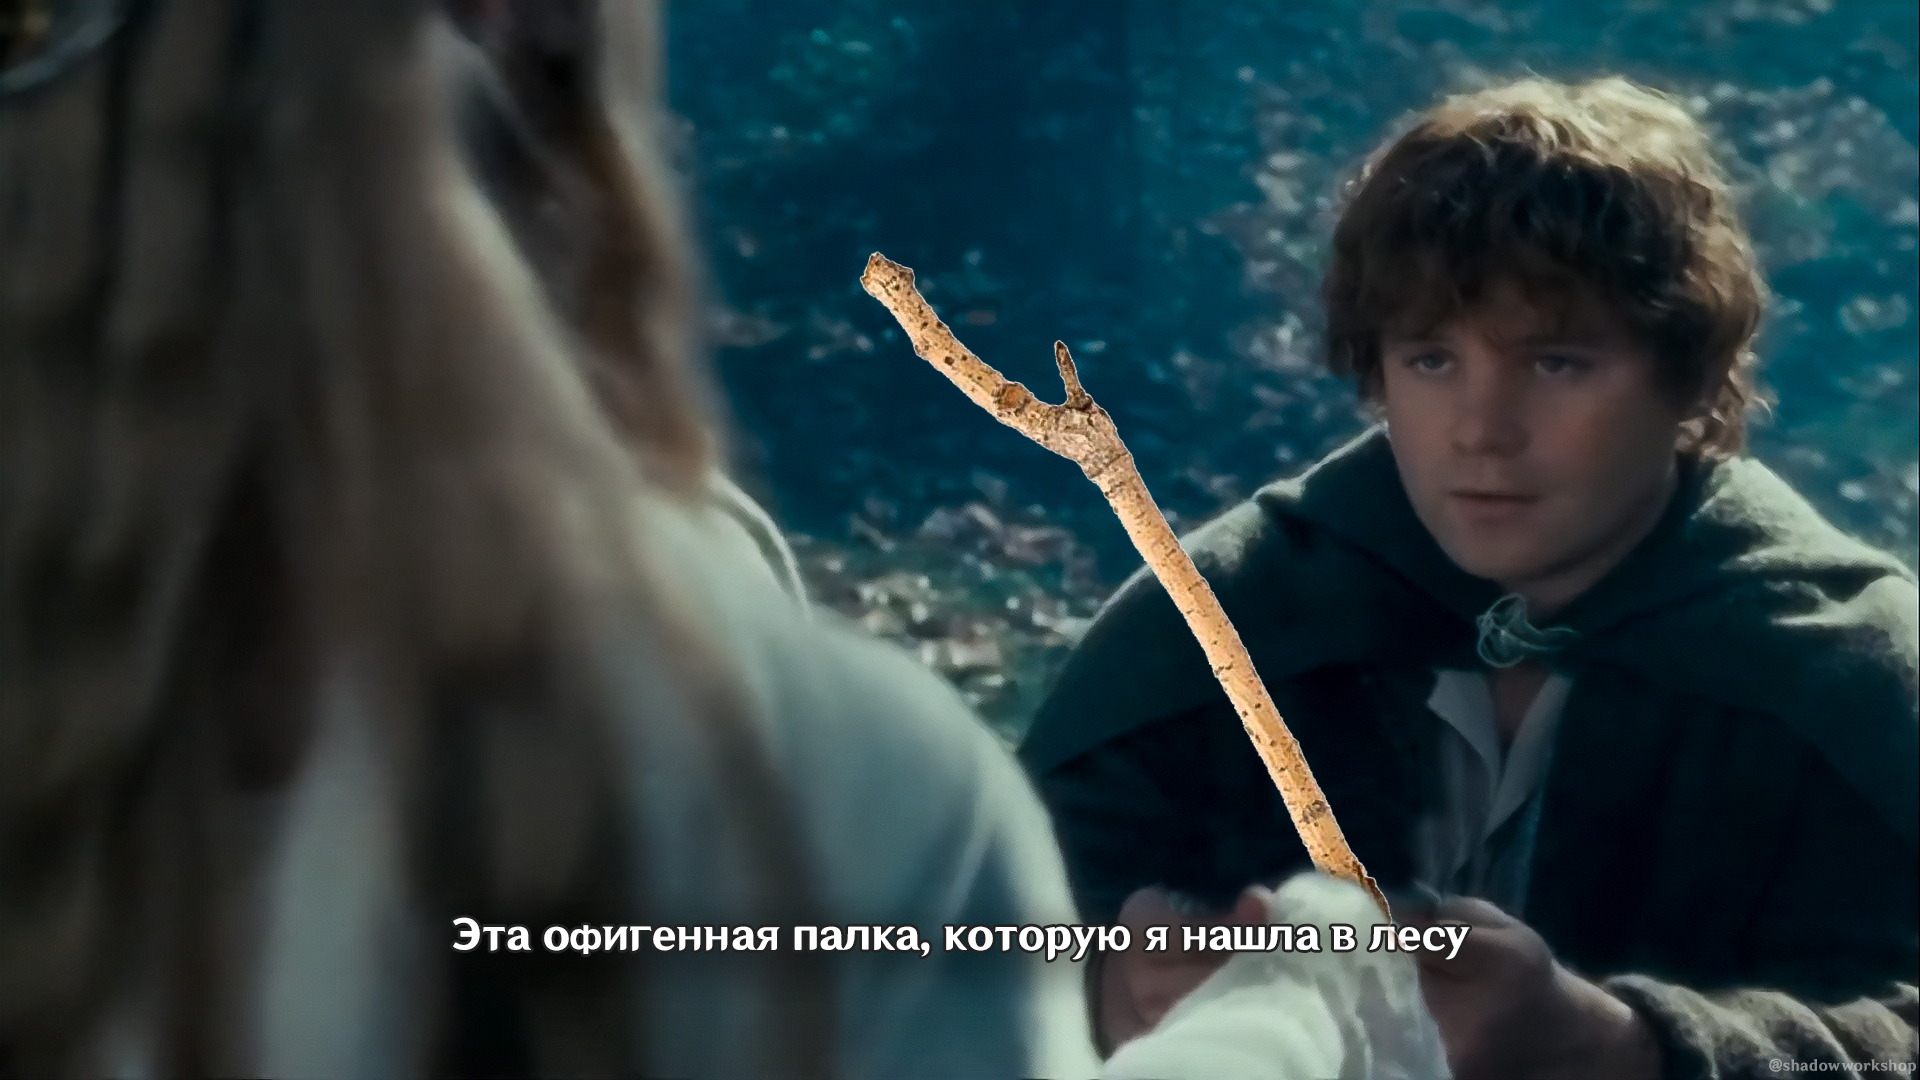 Elven Legendary Gifts - Lord of the Rings, Humor, Memes, Fantasy, Tolkien, Comics, The Fellowship of the Ring, Longpost, Storyboard